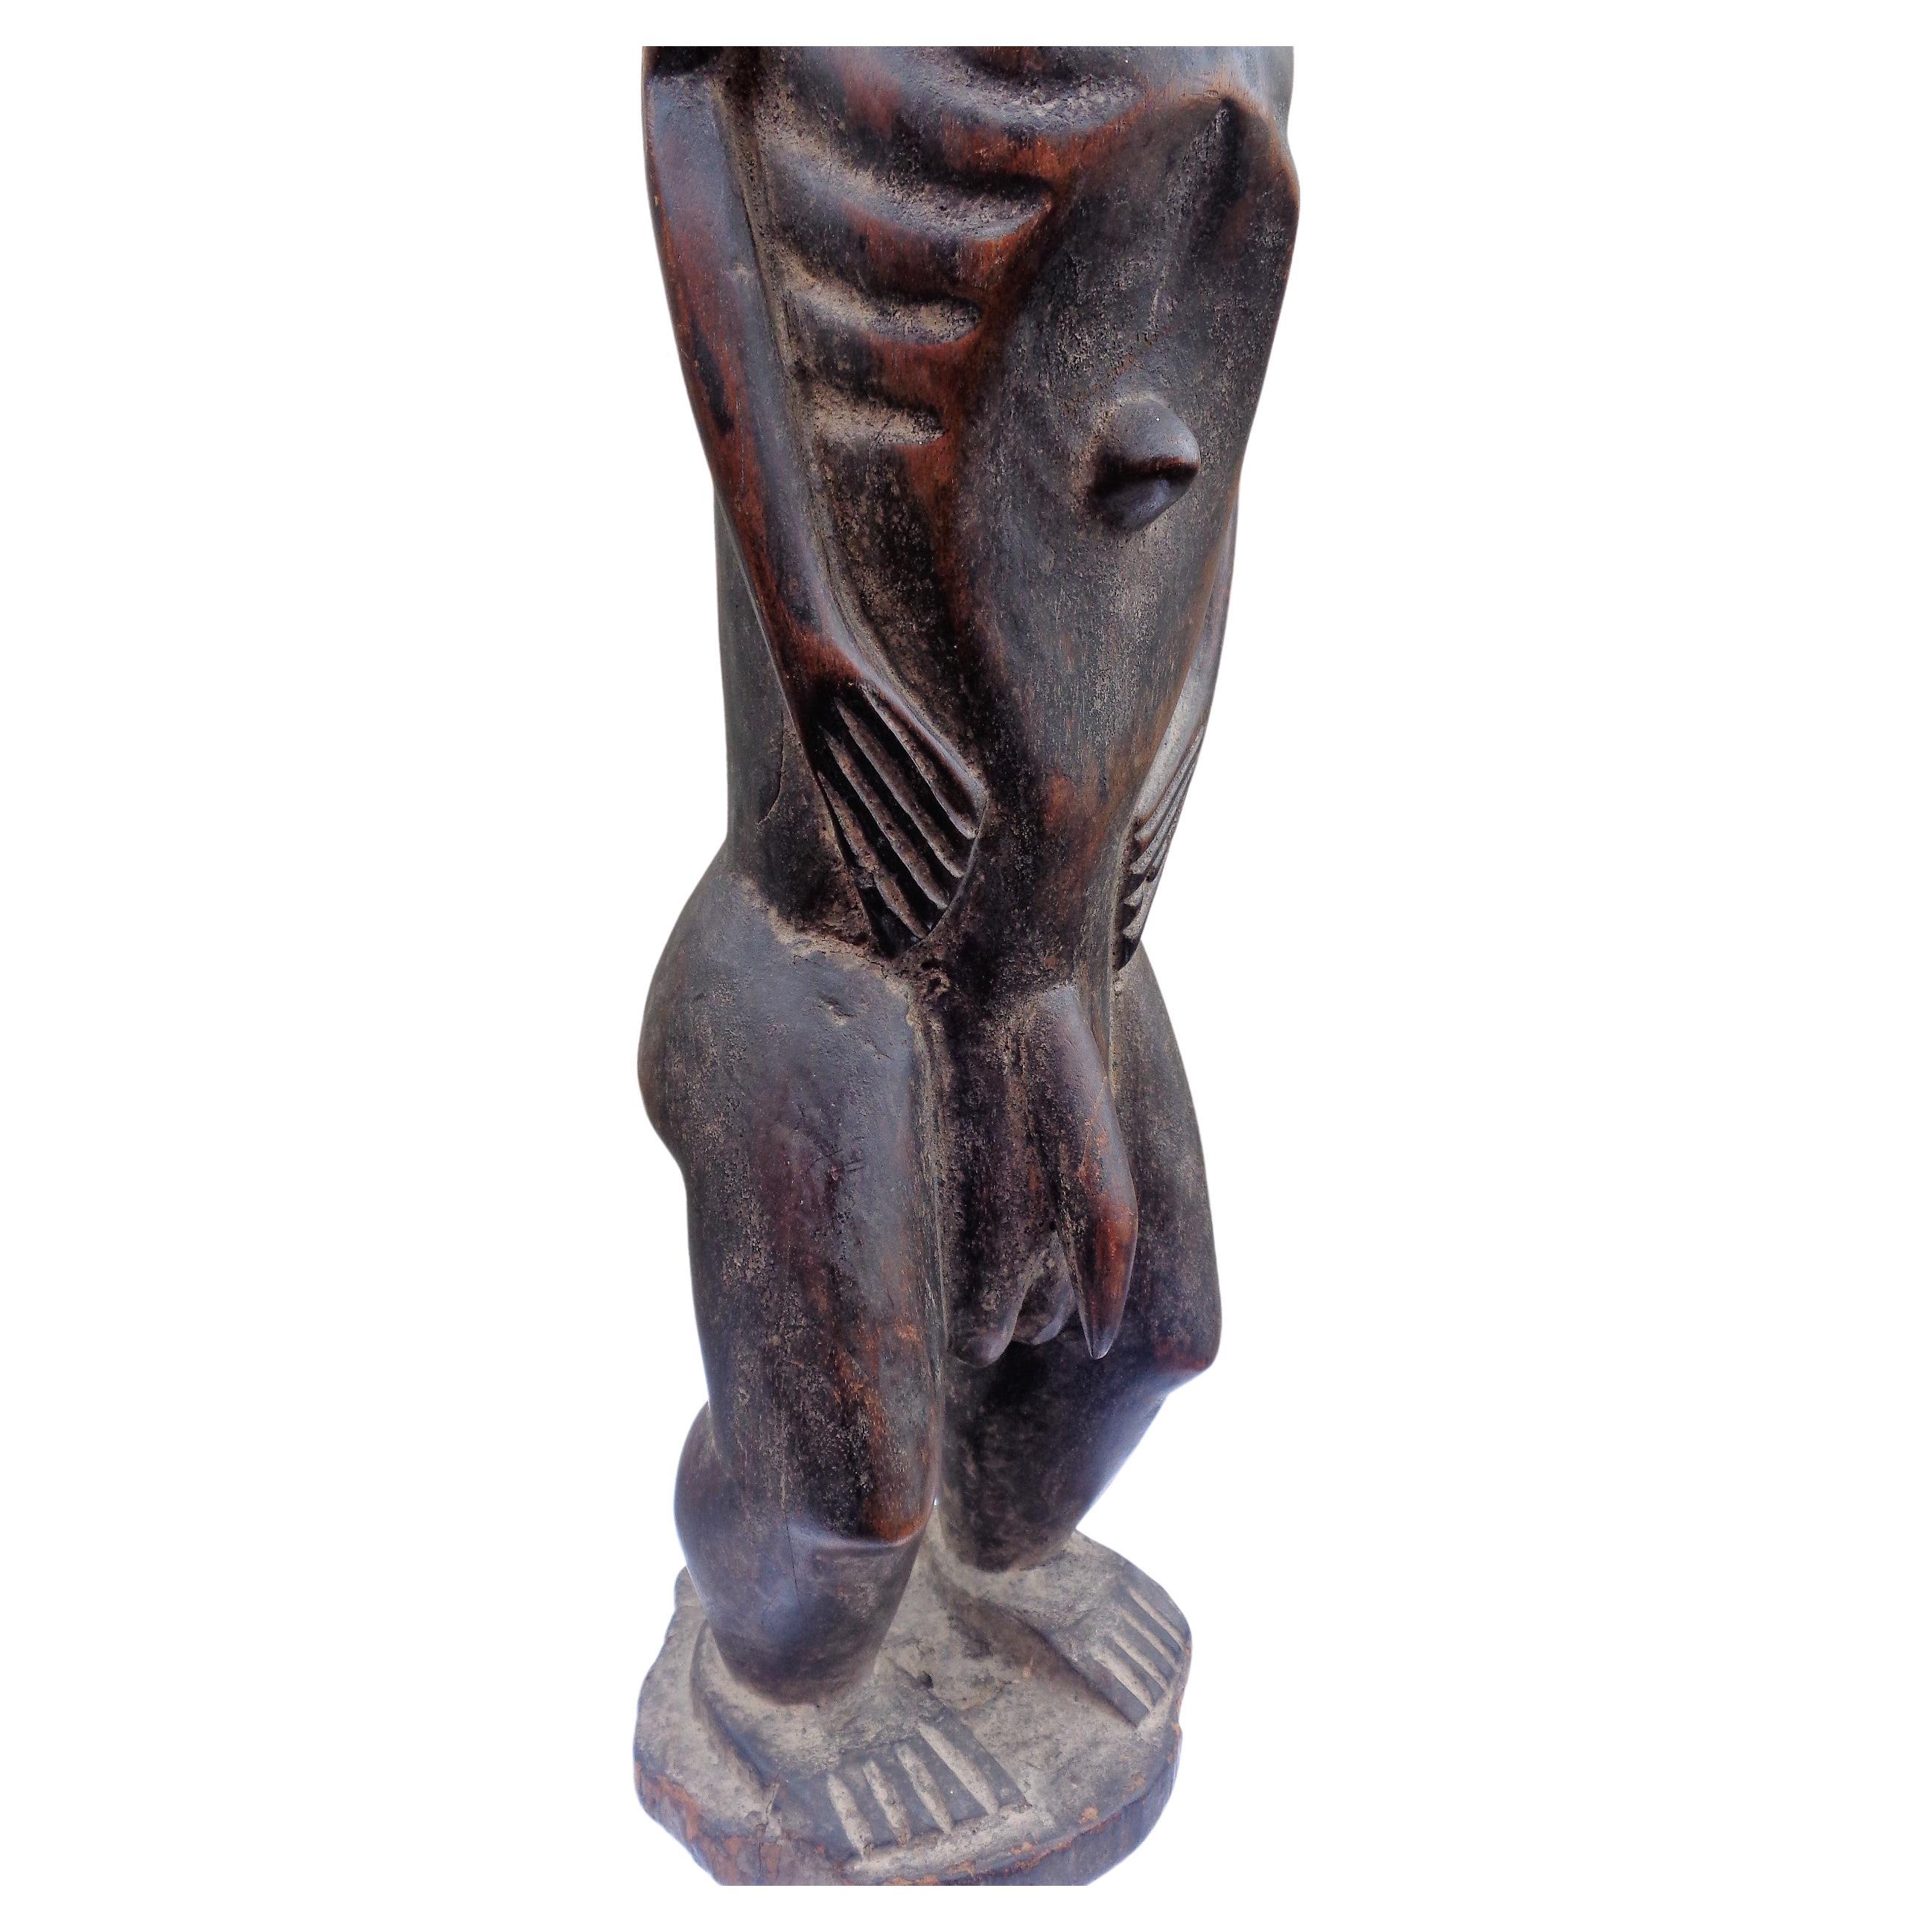  Oceanic Islands Carved Wood Male Figure For Sale 3